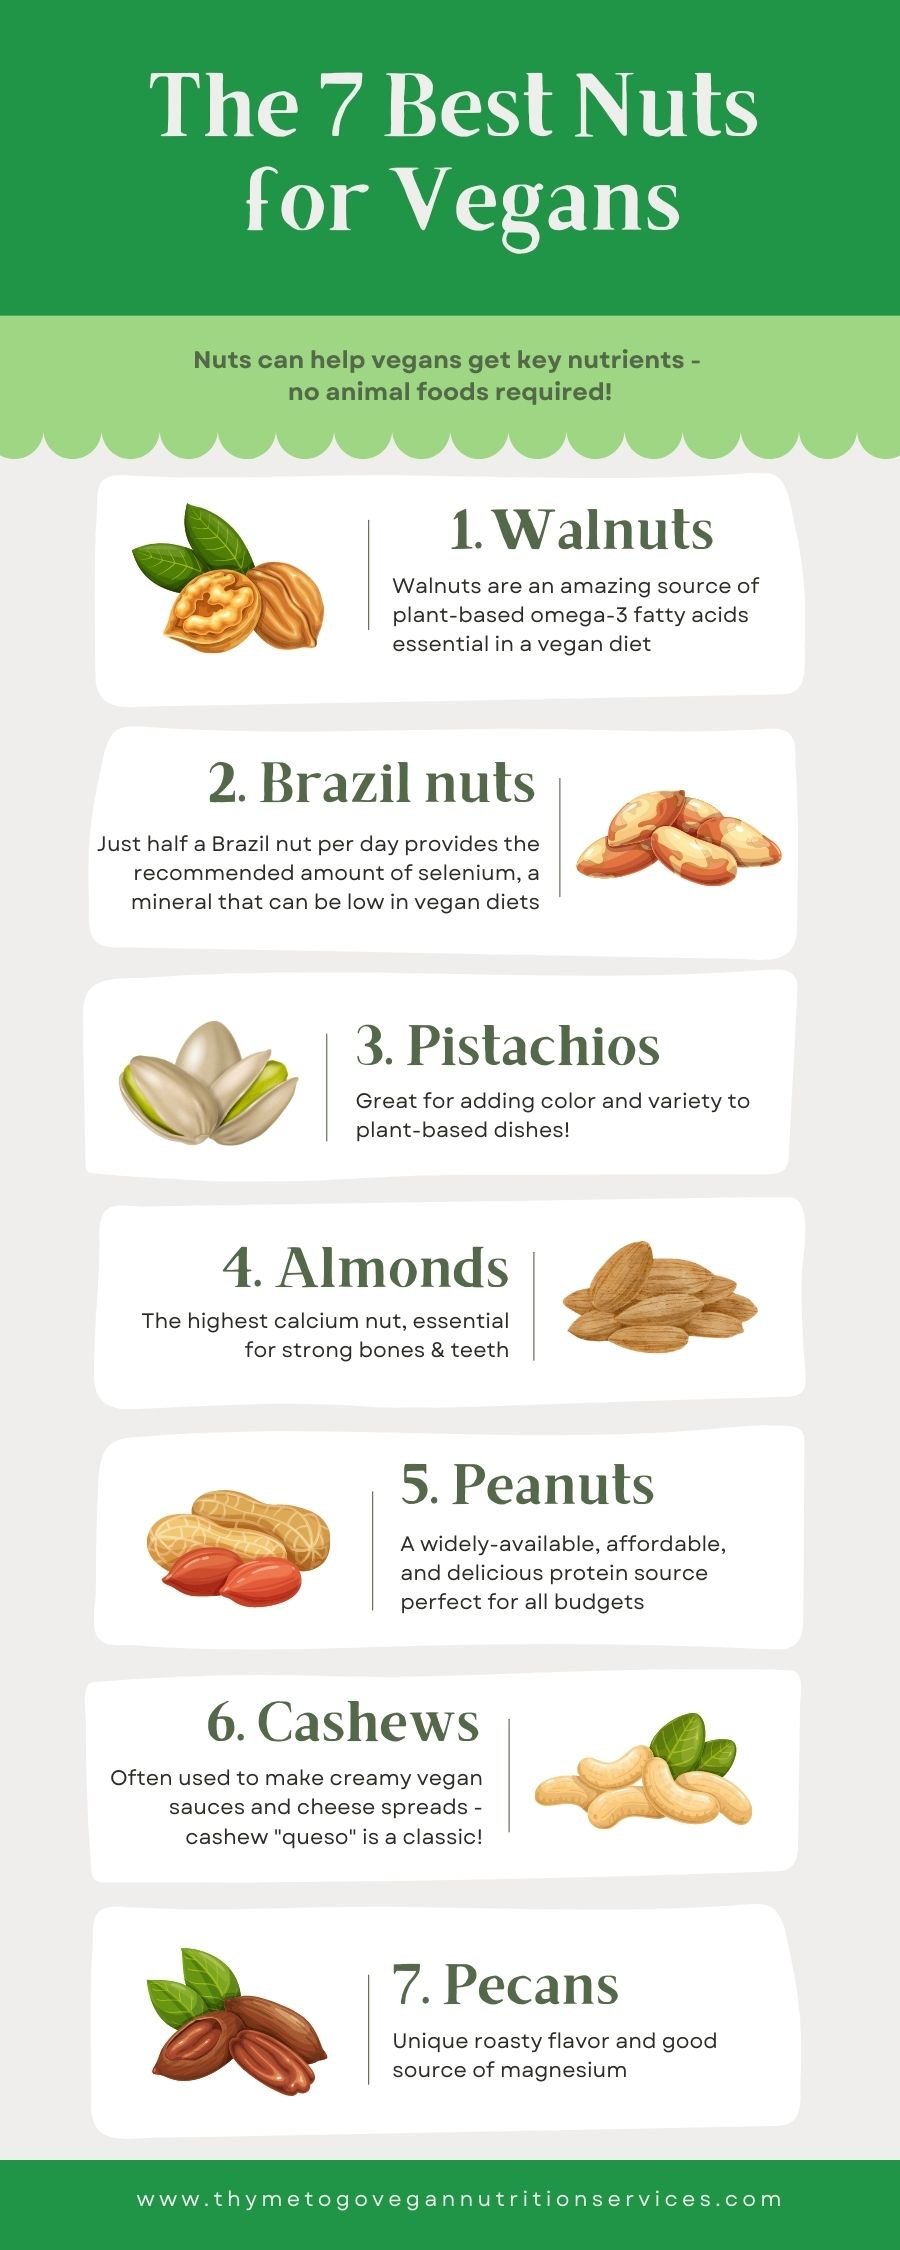 Infographic describing the 7 best nuts for vegans